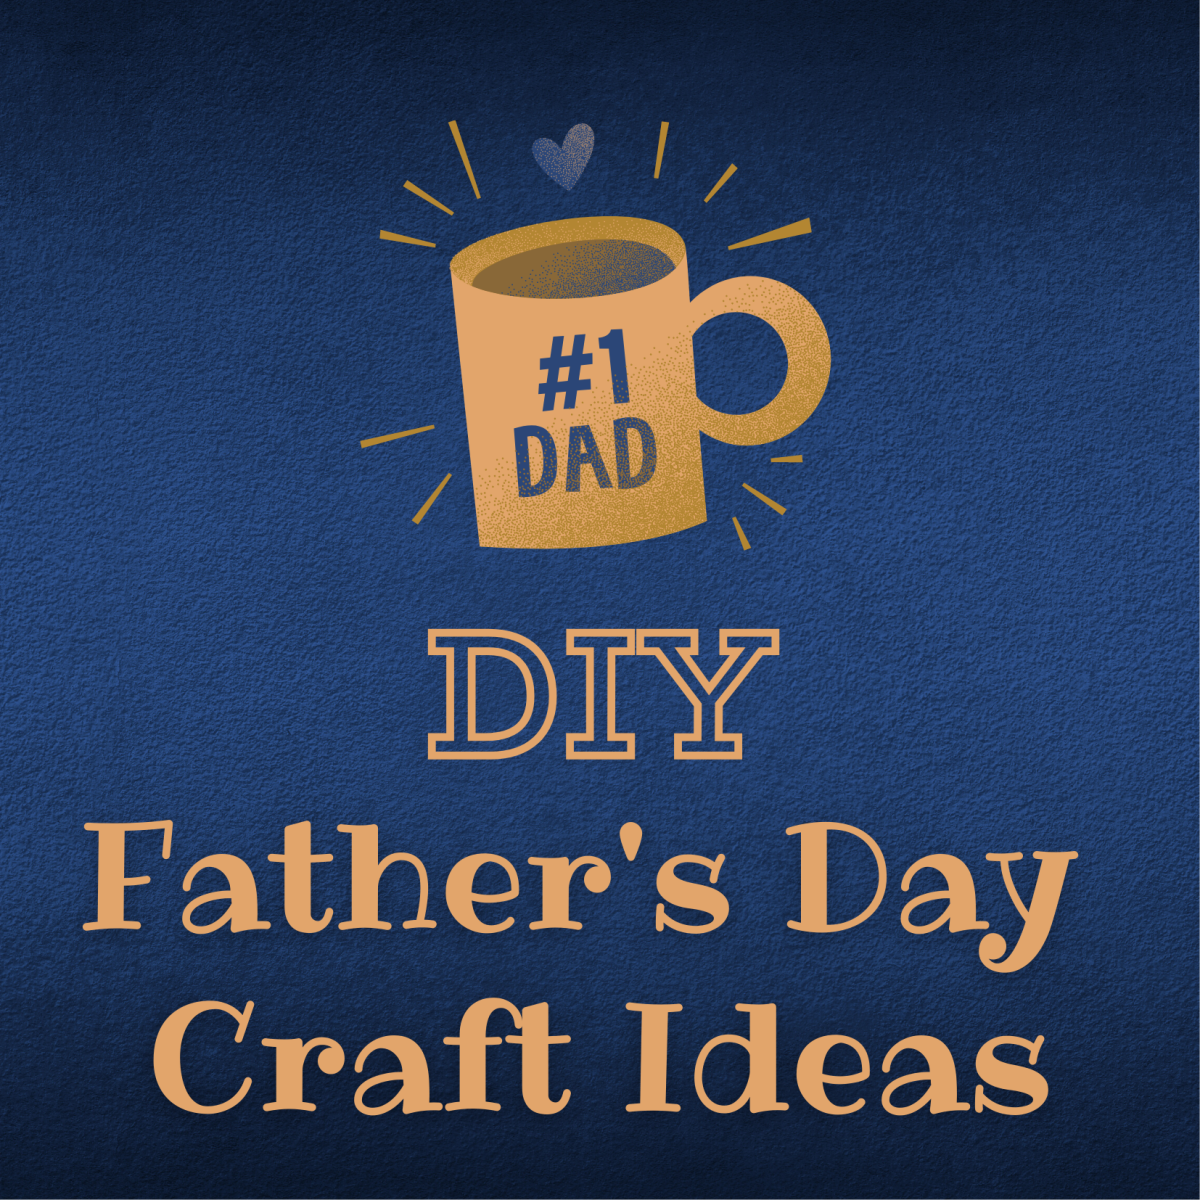 Wonderful DIY craft ideas for Father's Day